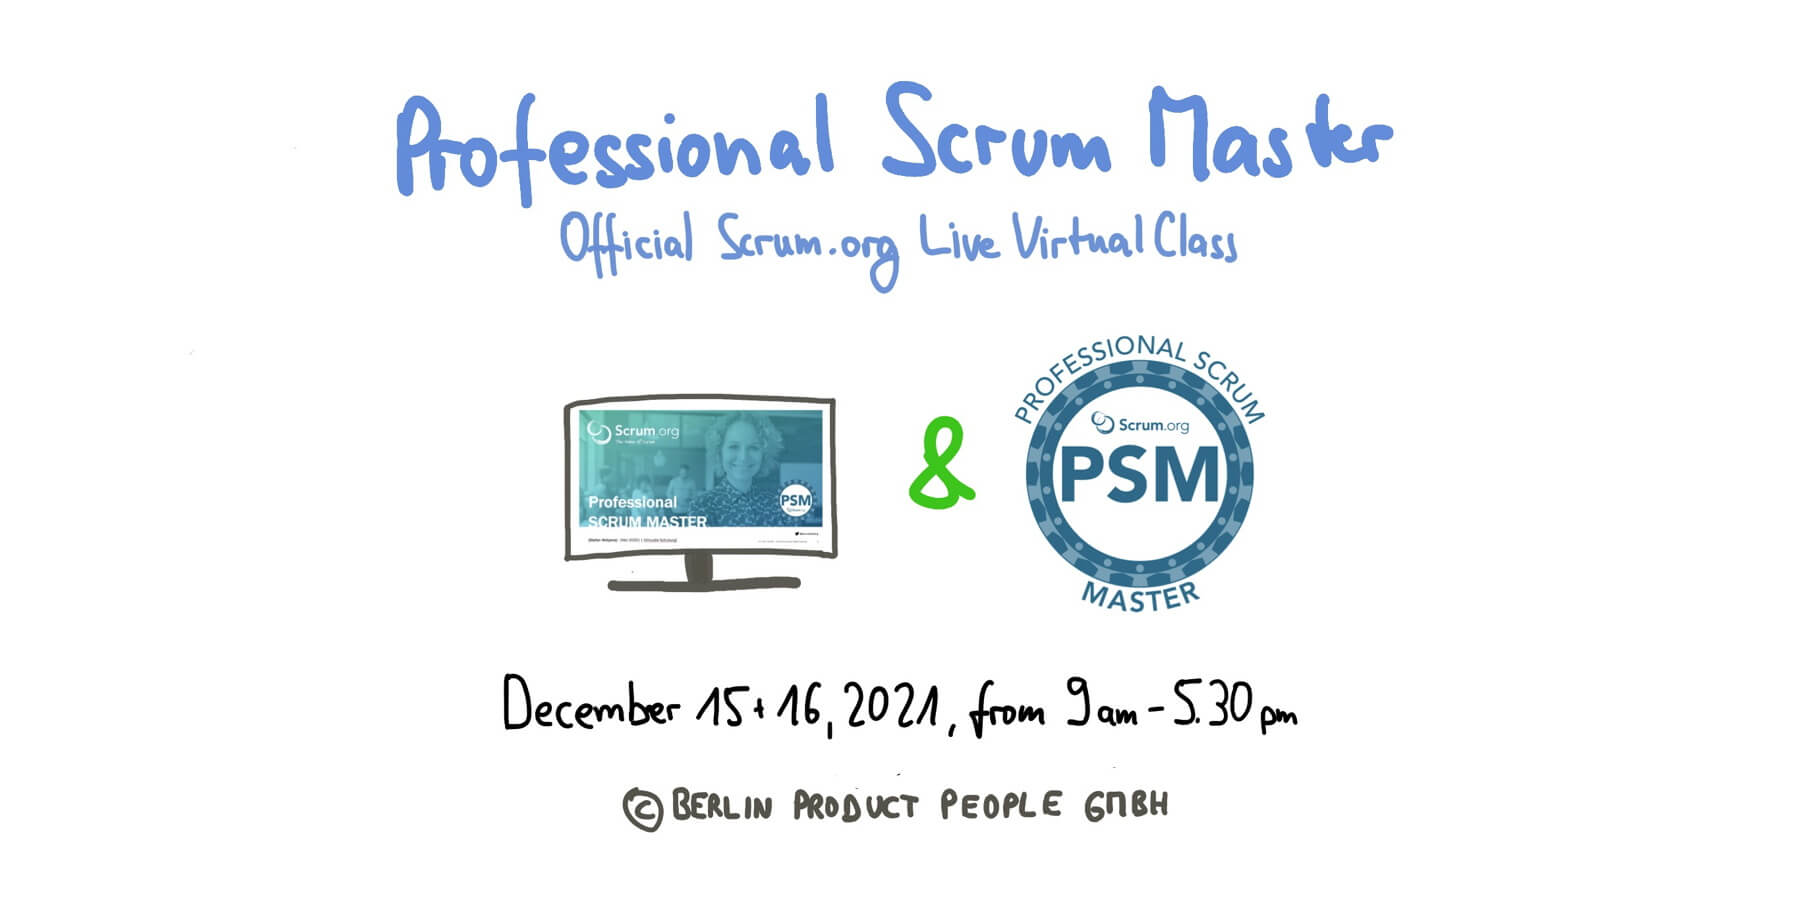 Professional Scrum Master Online Training w/ PSM I Certificate: December 15-16, 2021 — Berlin Product People GmbH